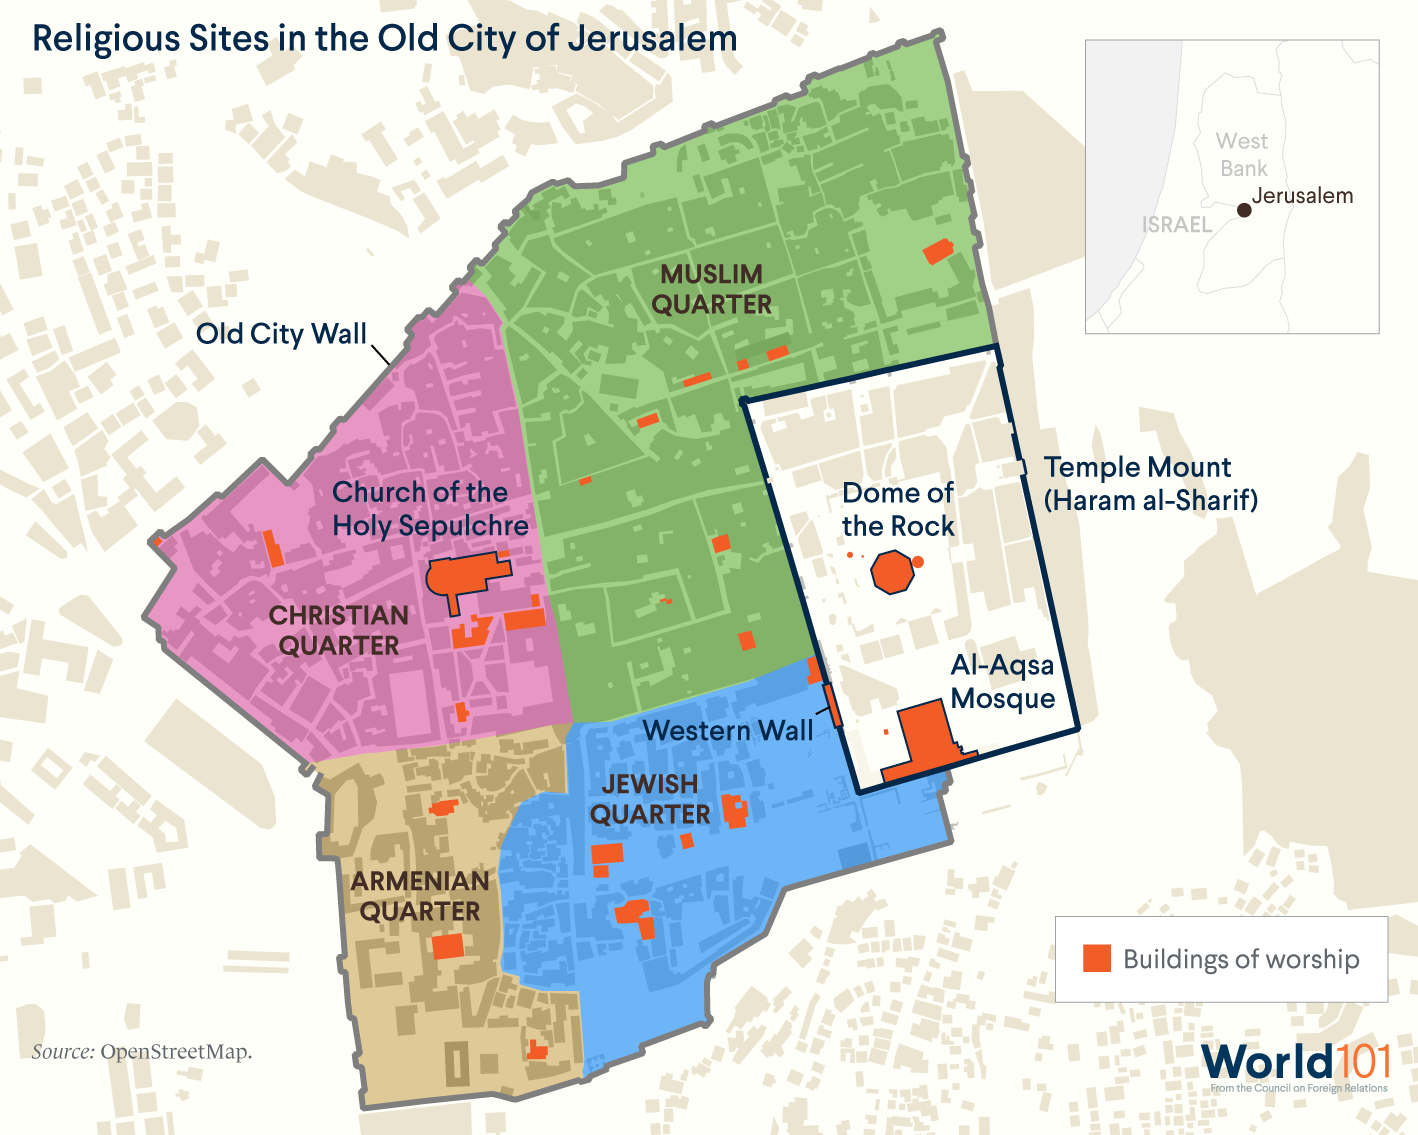 Map showing religious sites in the Old City of Jerusalem, including holy site known as Temple Mount to Jews and Haram al-Sharif to Muslims. For more info contact us at world101@cfr.org.